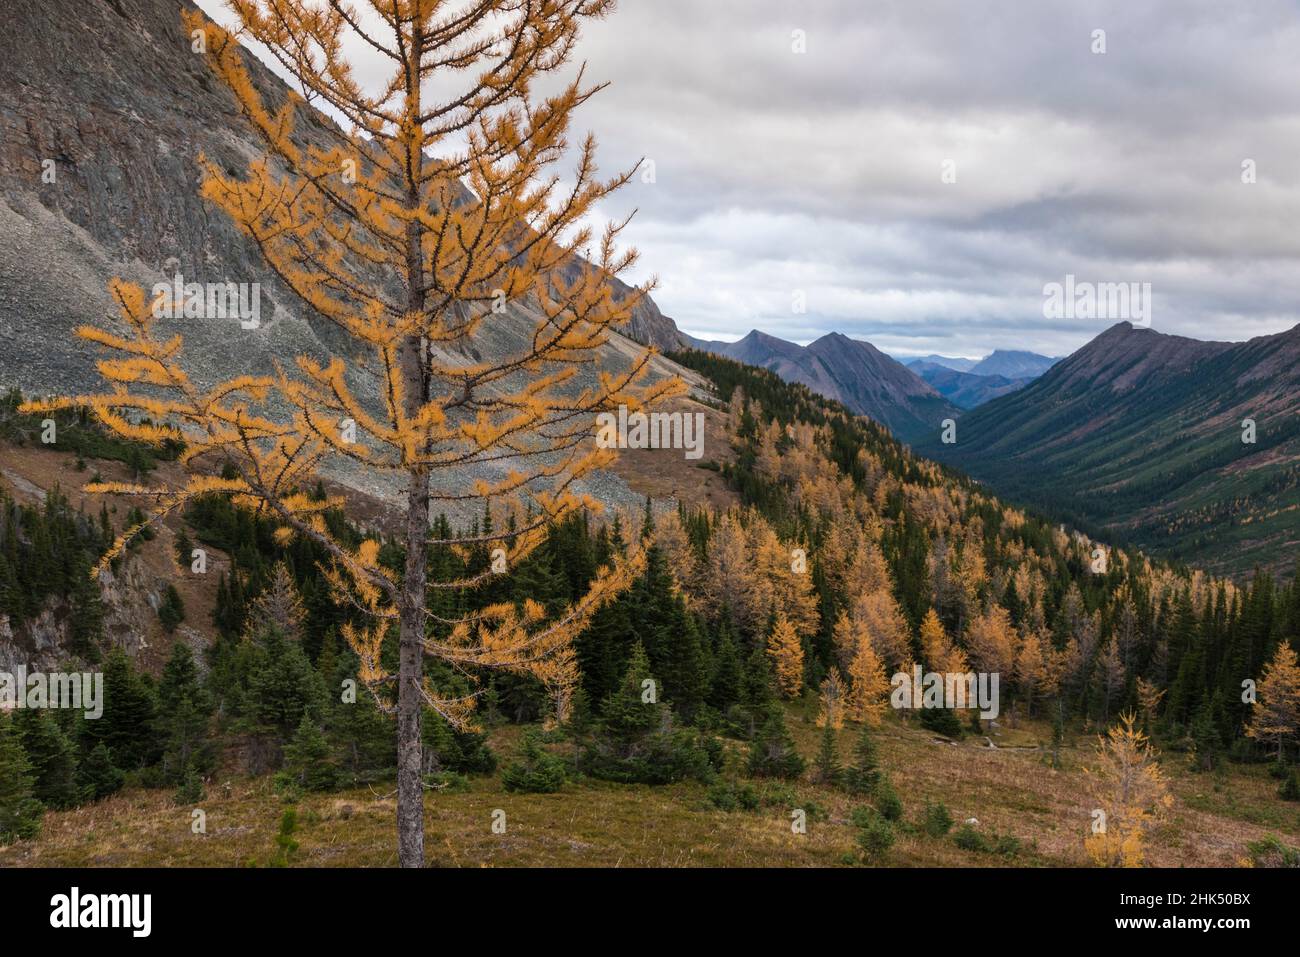 View of Canadian Rockies with autumn larch trees from Ptarmigan Cirque Trail near Peter Lougheed Provincial Park, Kananaskis, Alberta, Canada Stock Photo